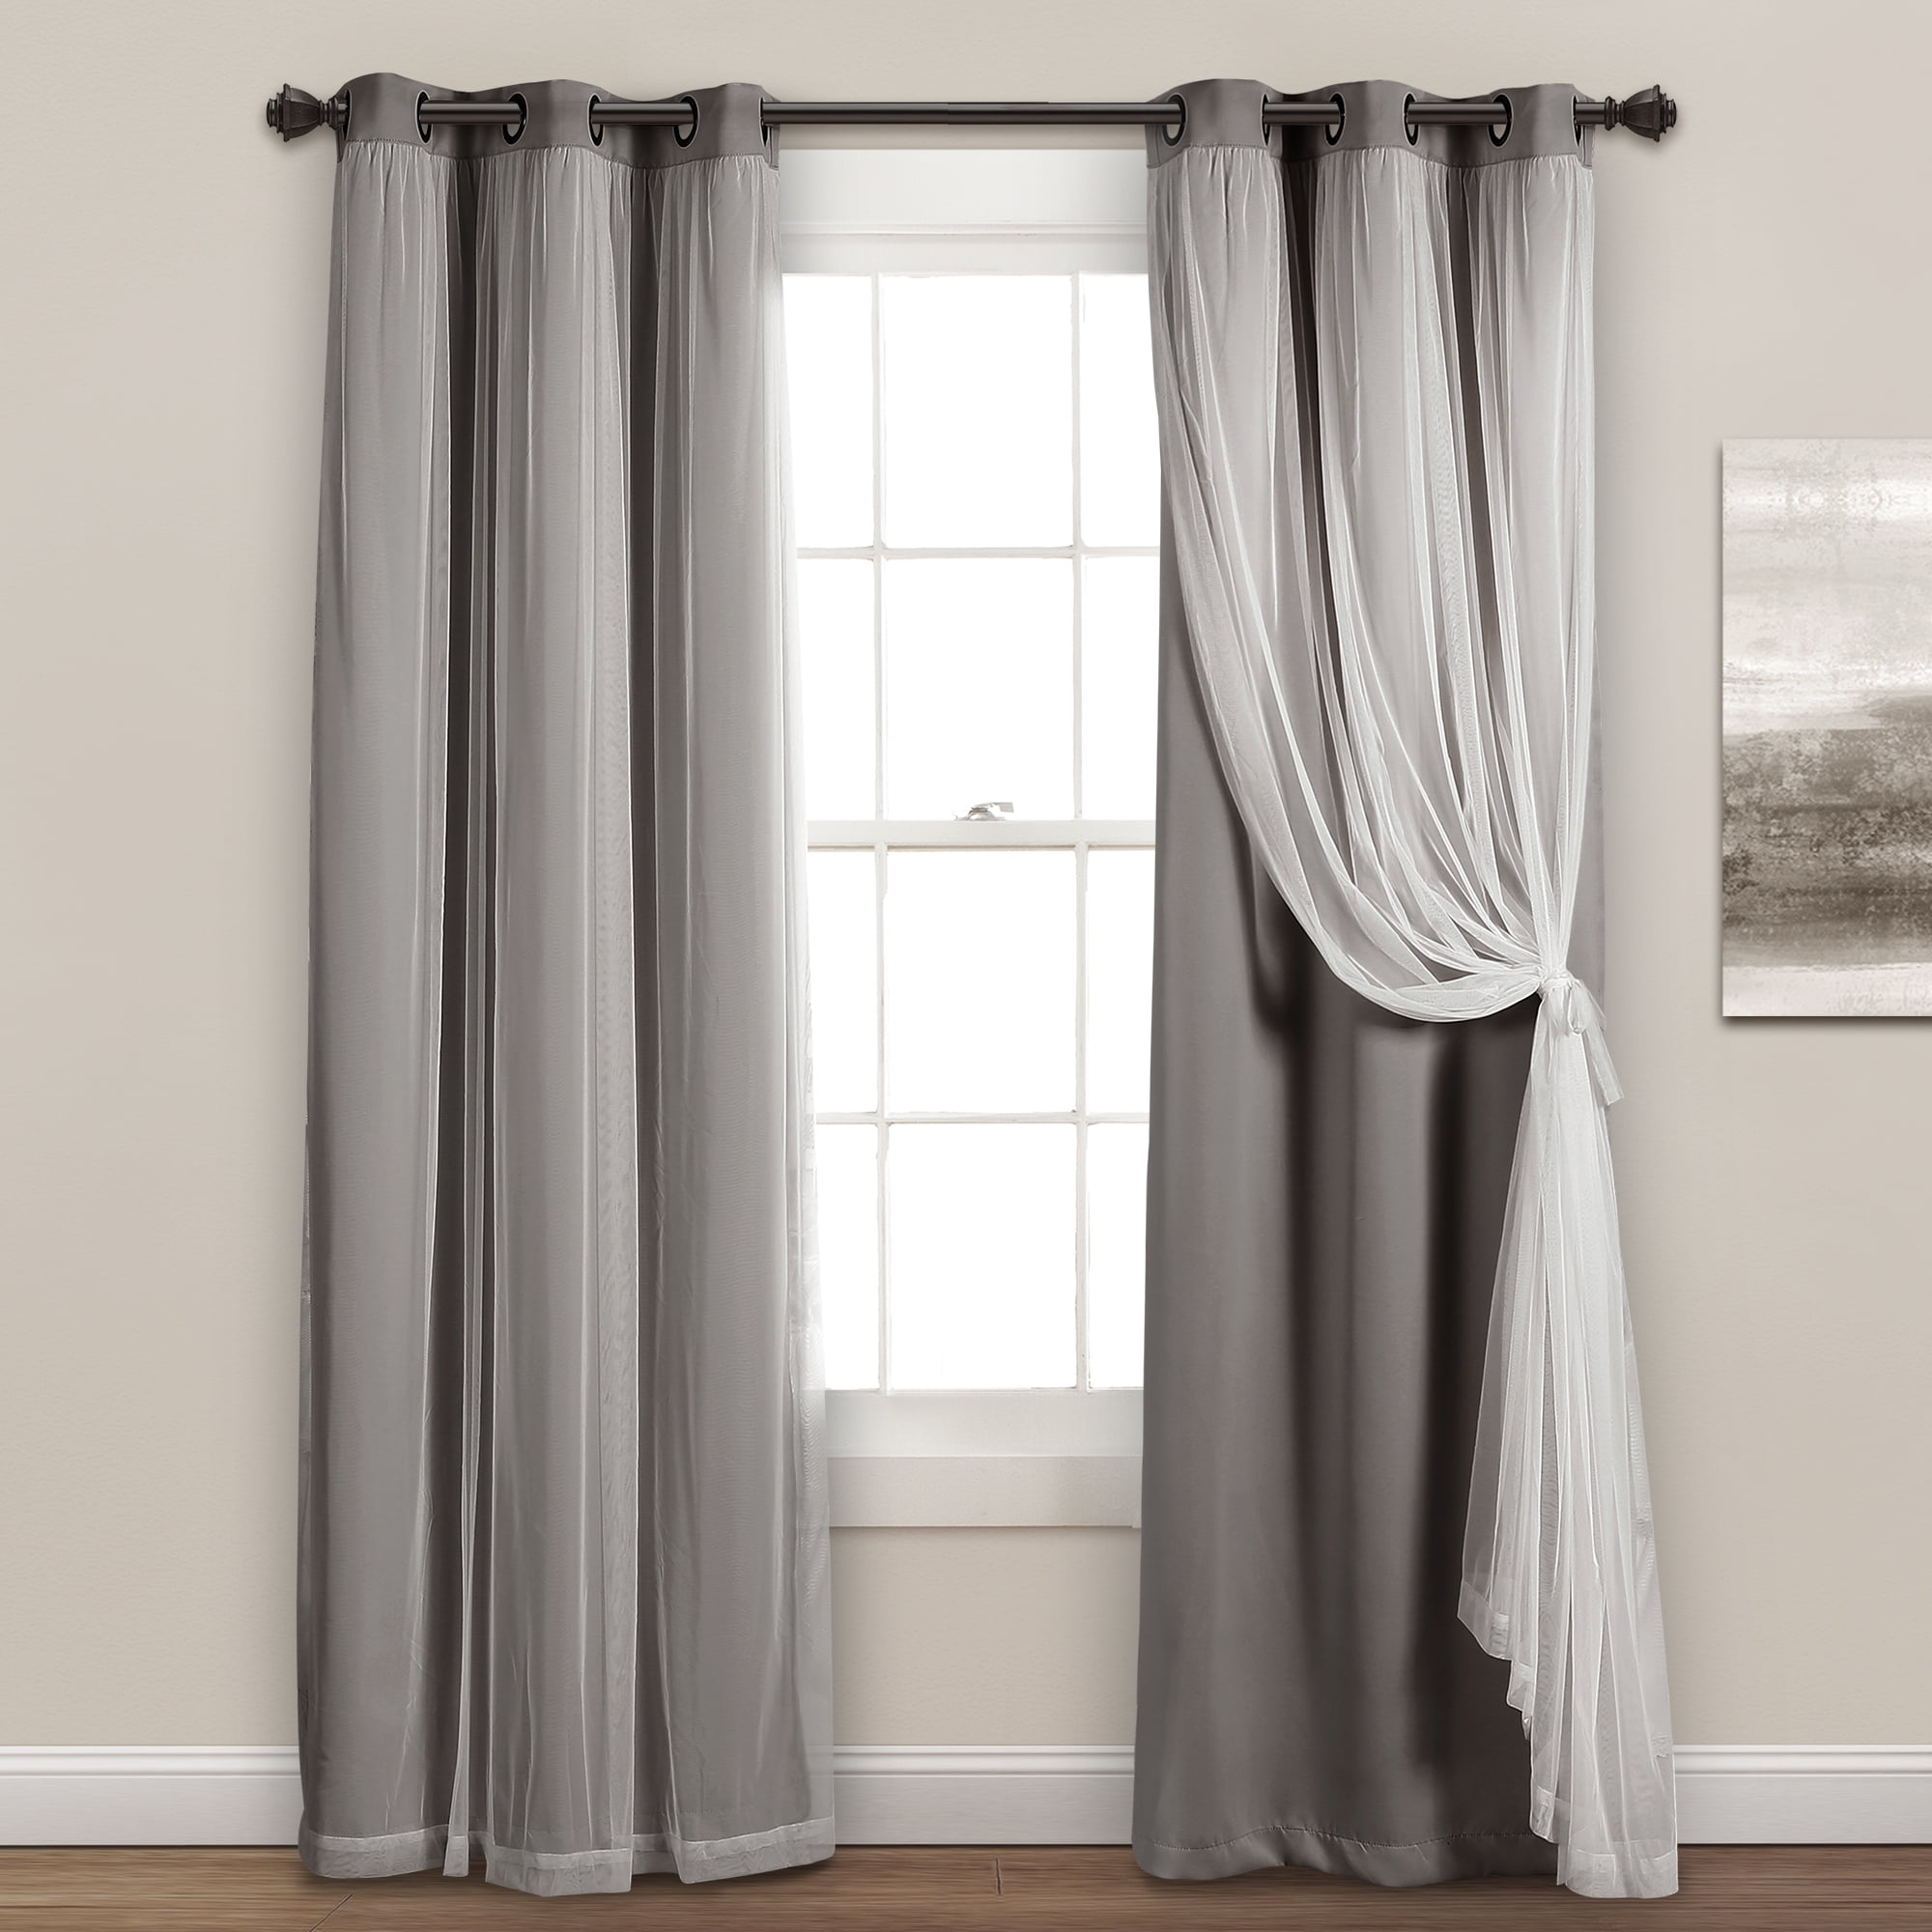 Details about   Fully Stitched Sheer Window Curtain Panel Drapes Modern Blackout Curtains blinds 